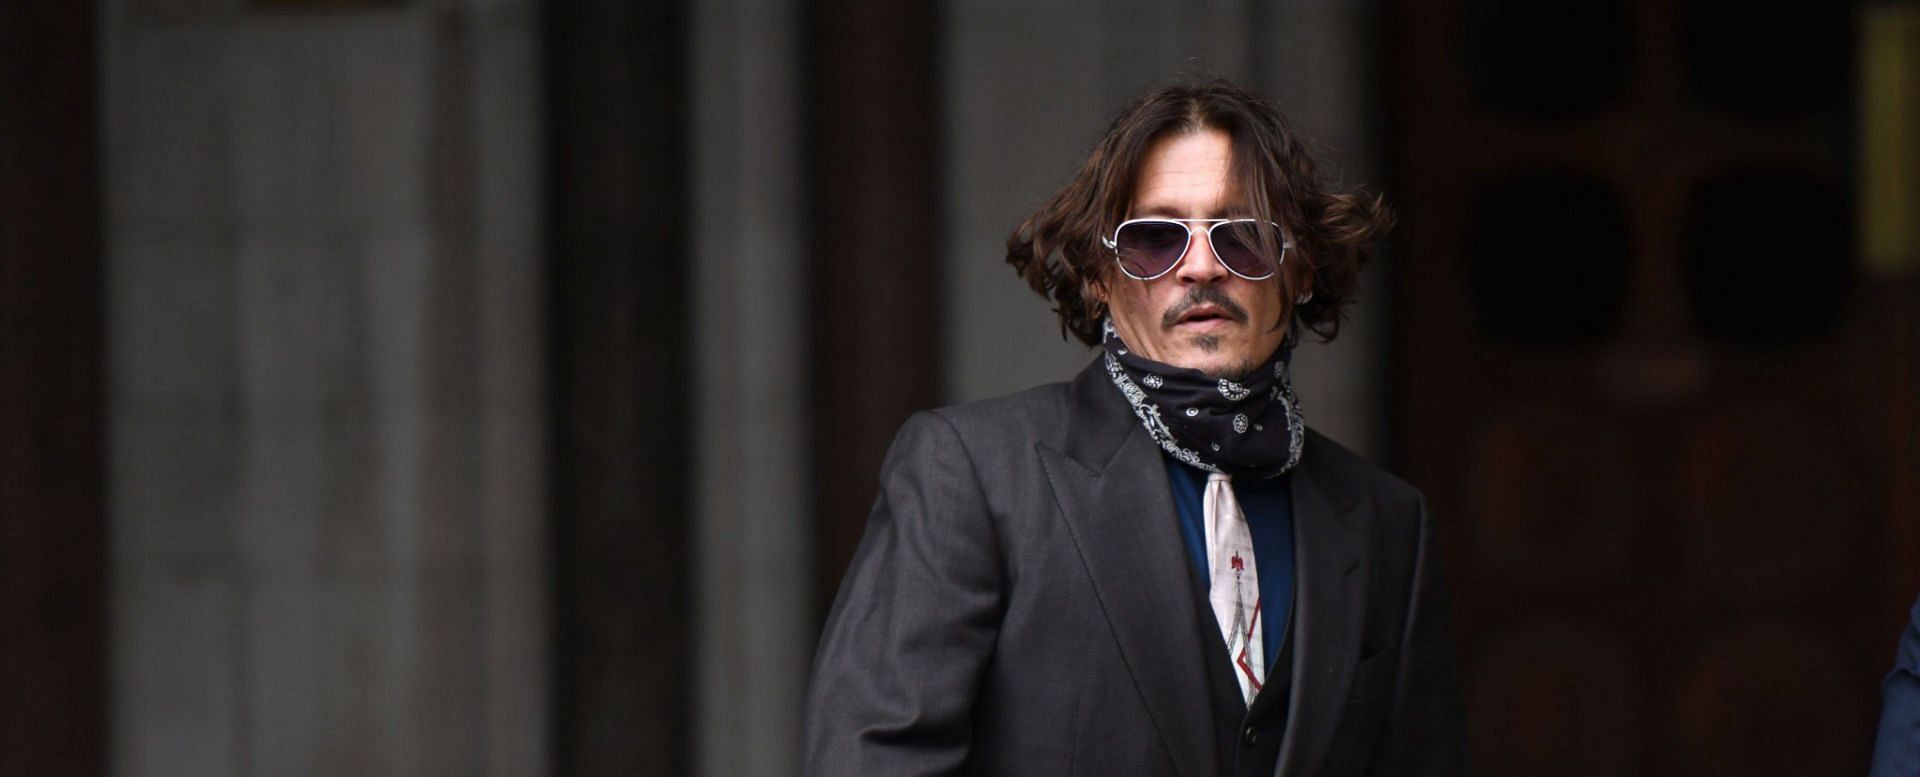 Johnny Depp lost $650 million of his earnings between 2003 and 2016 (Image via Getty Images)